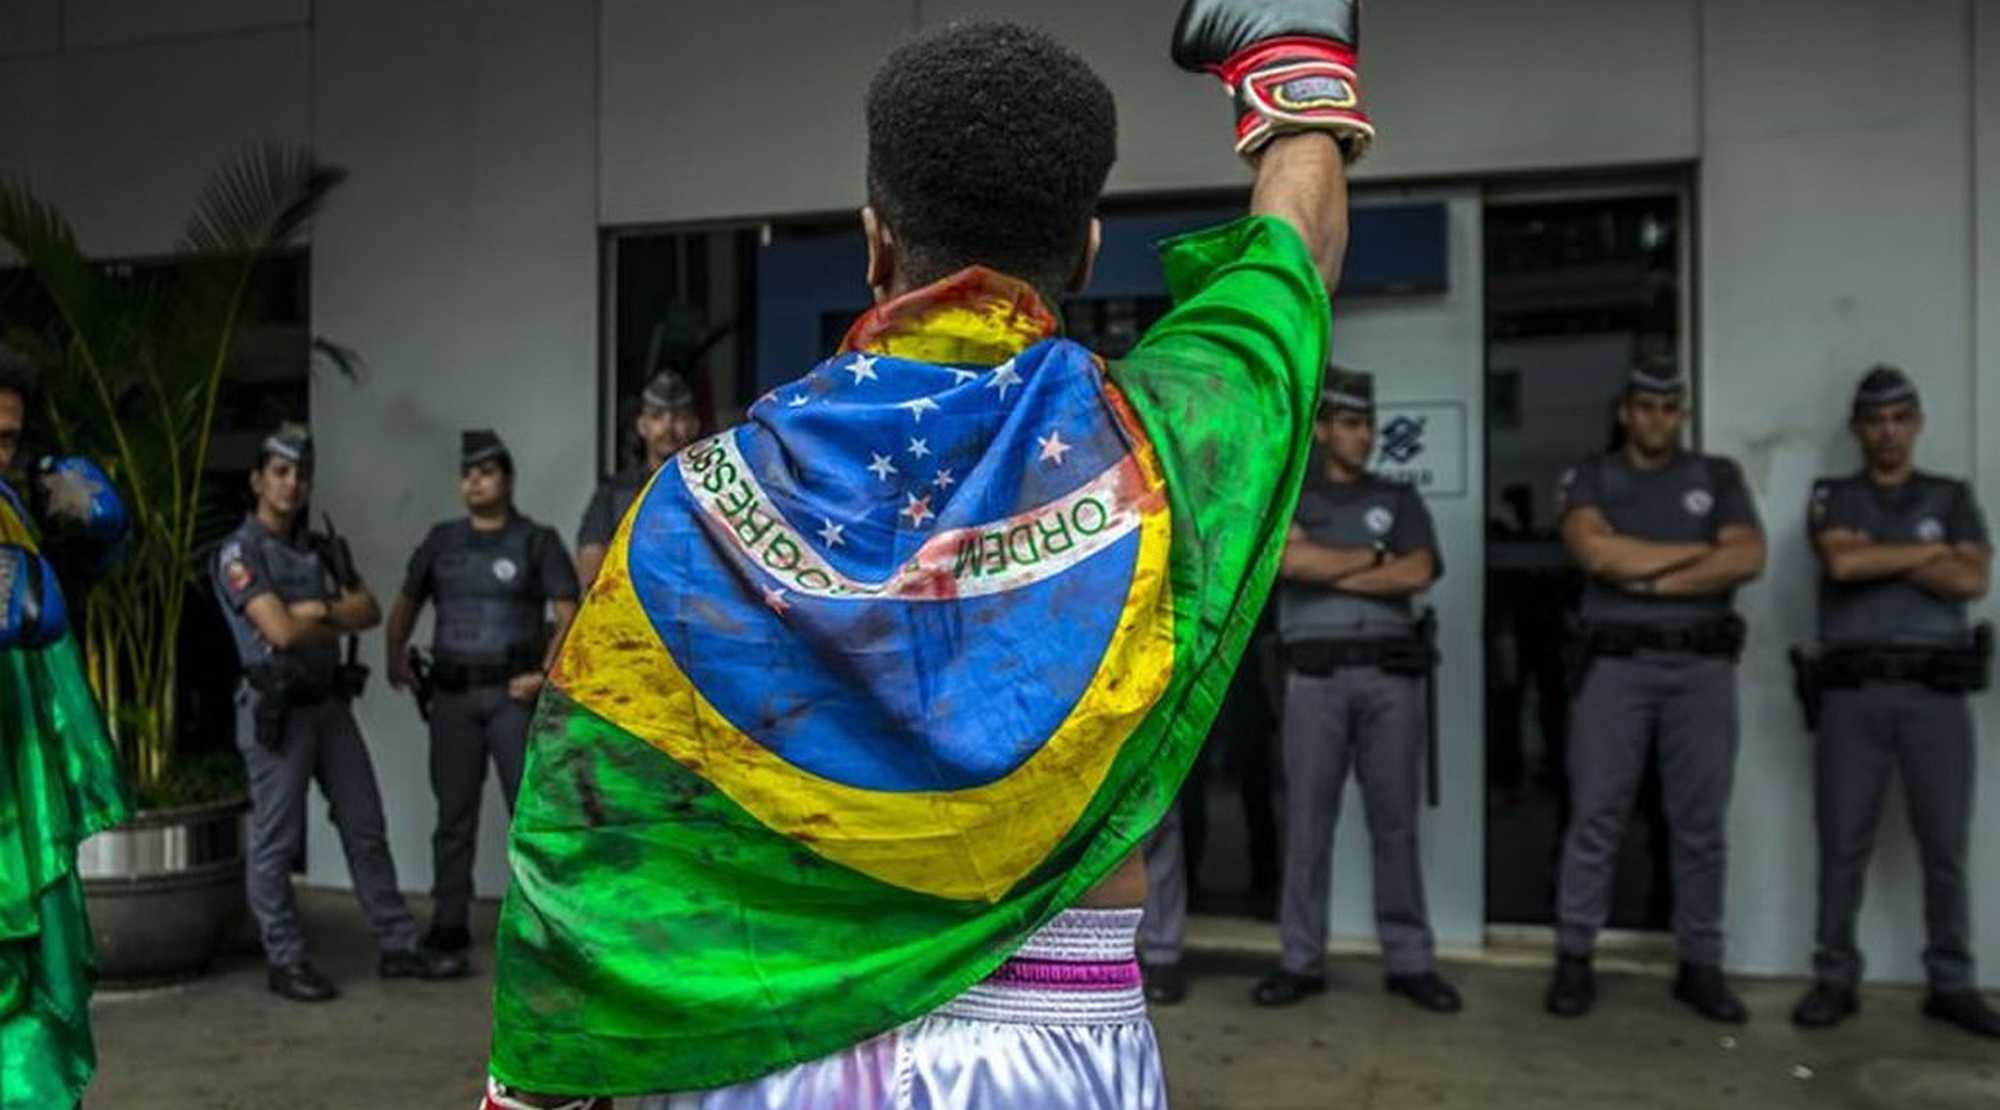 Wrapped in the Brazilian flag, black man participates in the Black Conscience March, in São Paulo | NurPhoto/PA Images